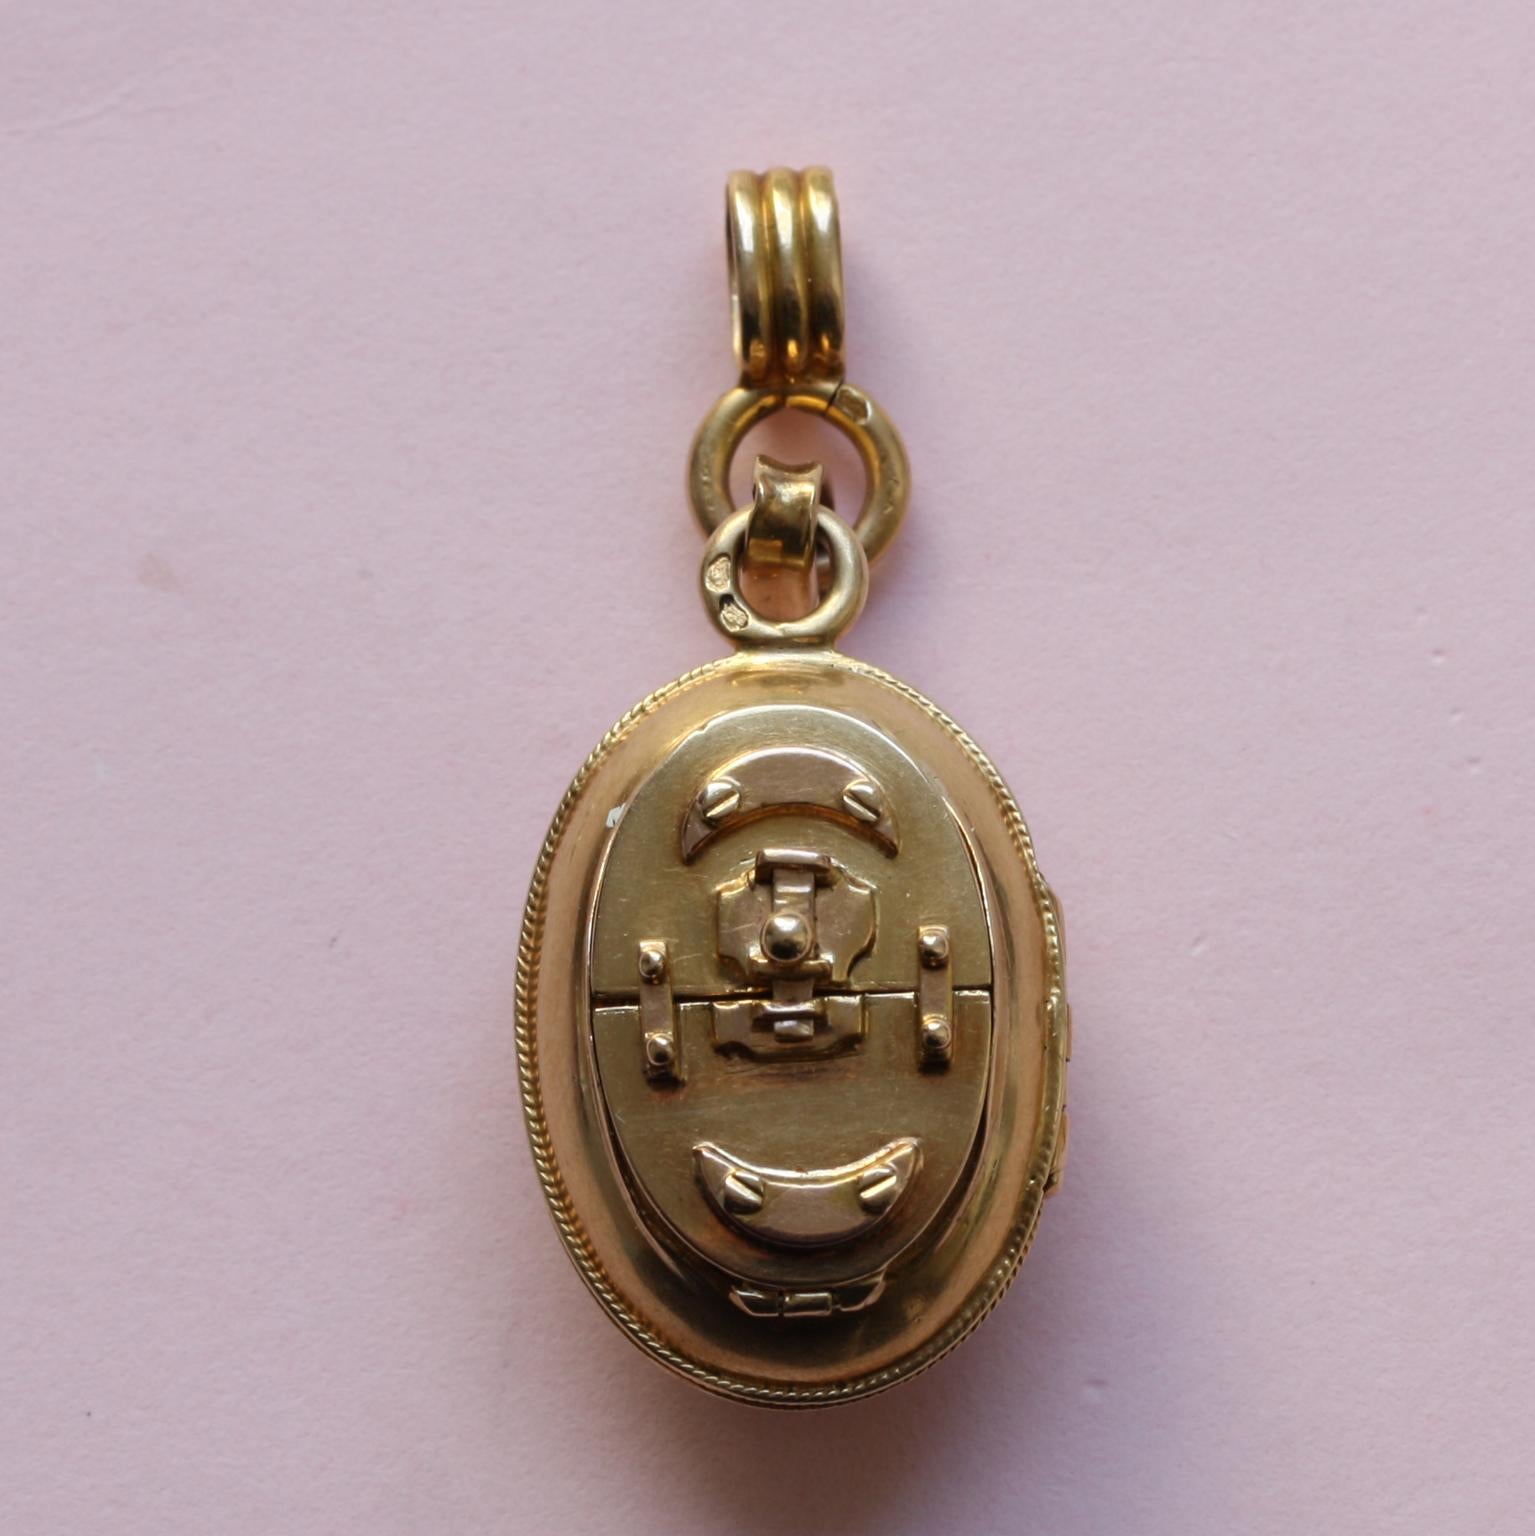 An 18 carat French locket with two compartments. One opens vertically from the middle and one opens horizontally with an actual sliding lock, each compartment has its own extra cover with glass, 19th century.

weight: 10.35 grams
size: 2.9 x 1.7 cm